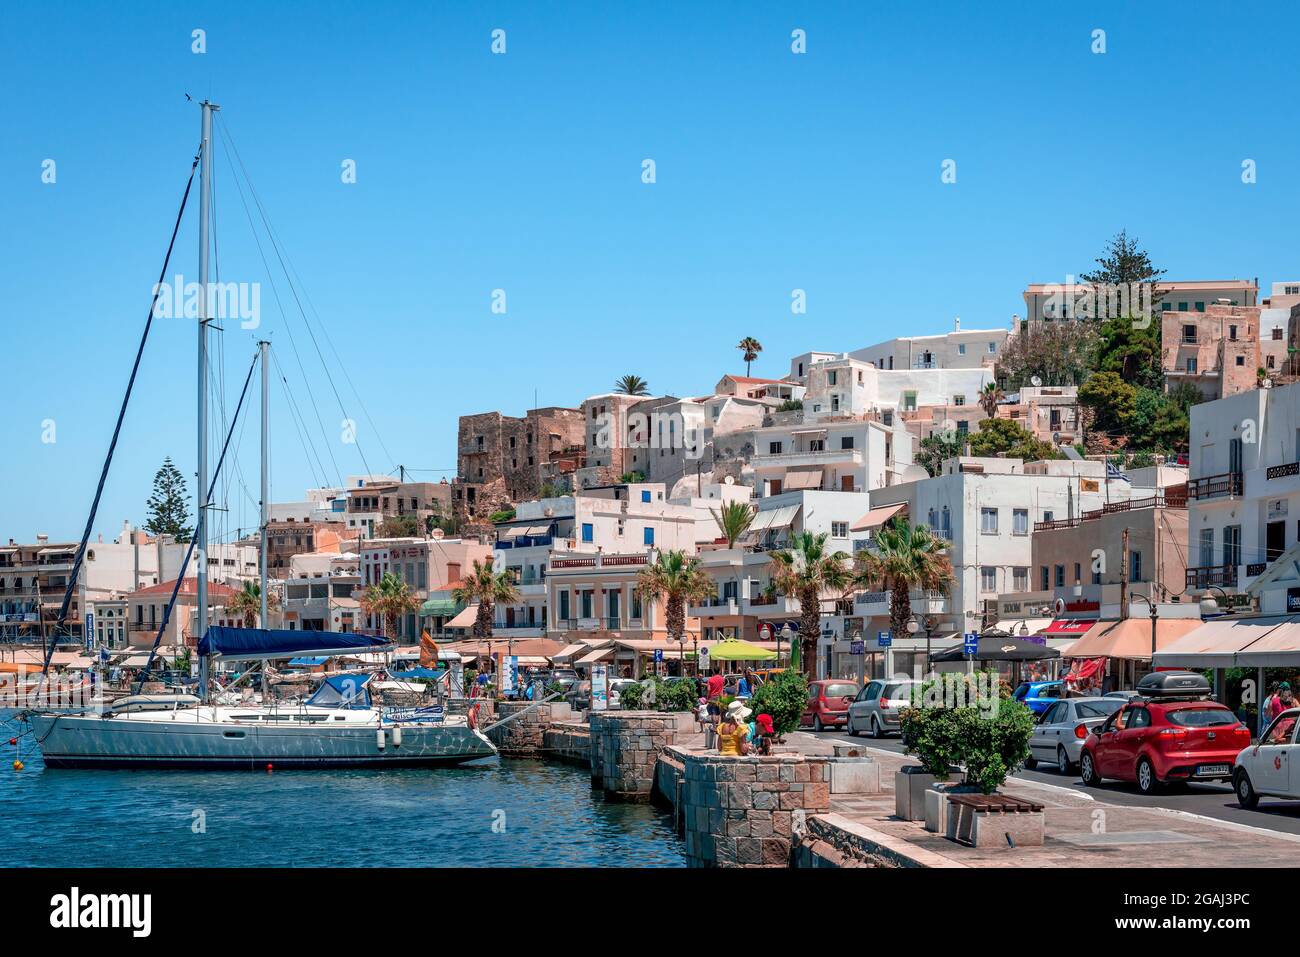 Naxos, Greece - July 23 2016: View of the port and the old town, on a summer's day. Naxos is an island (and a town) of the Cyclades Archipelagos, in t Stock Photo